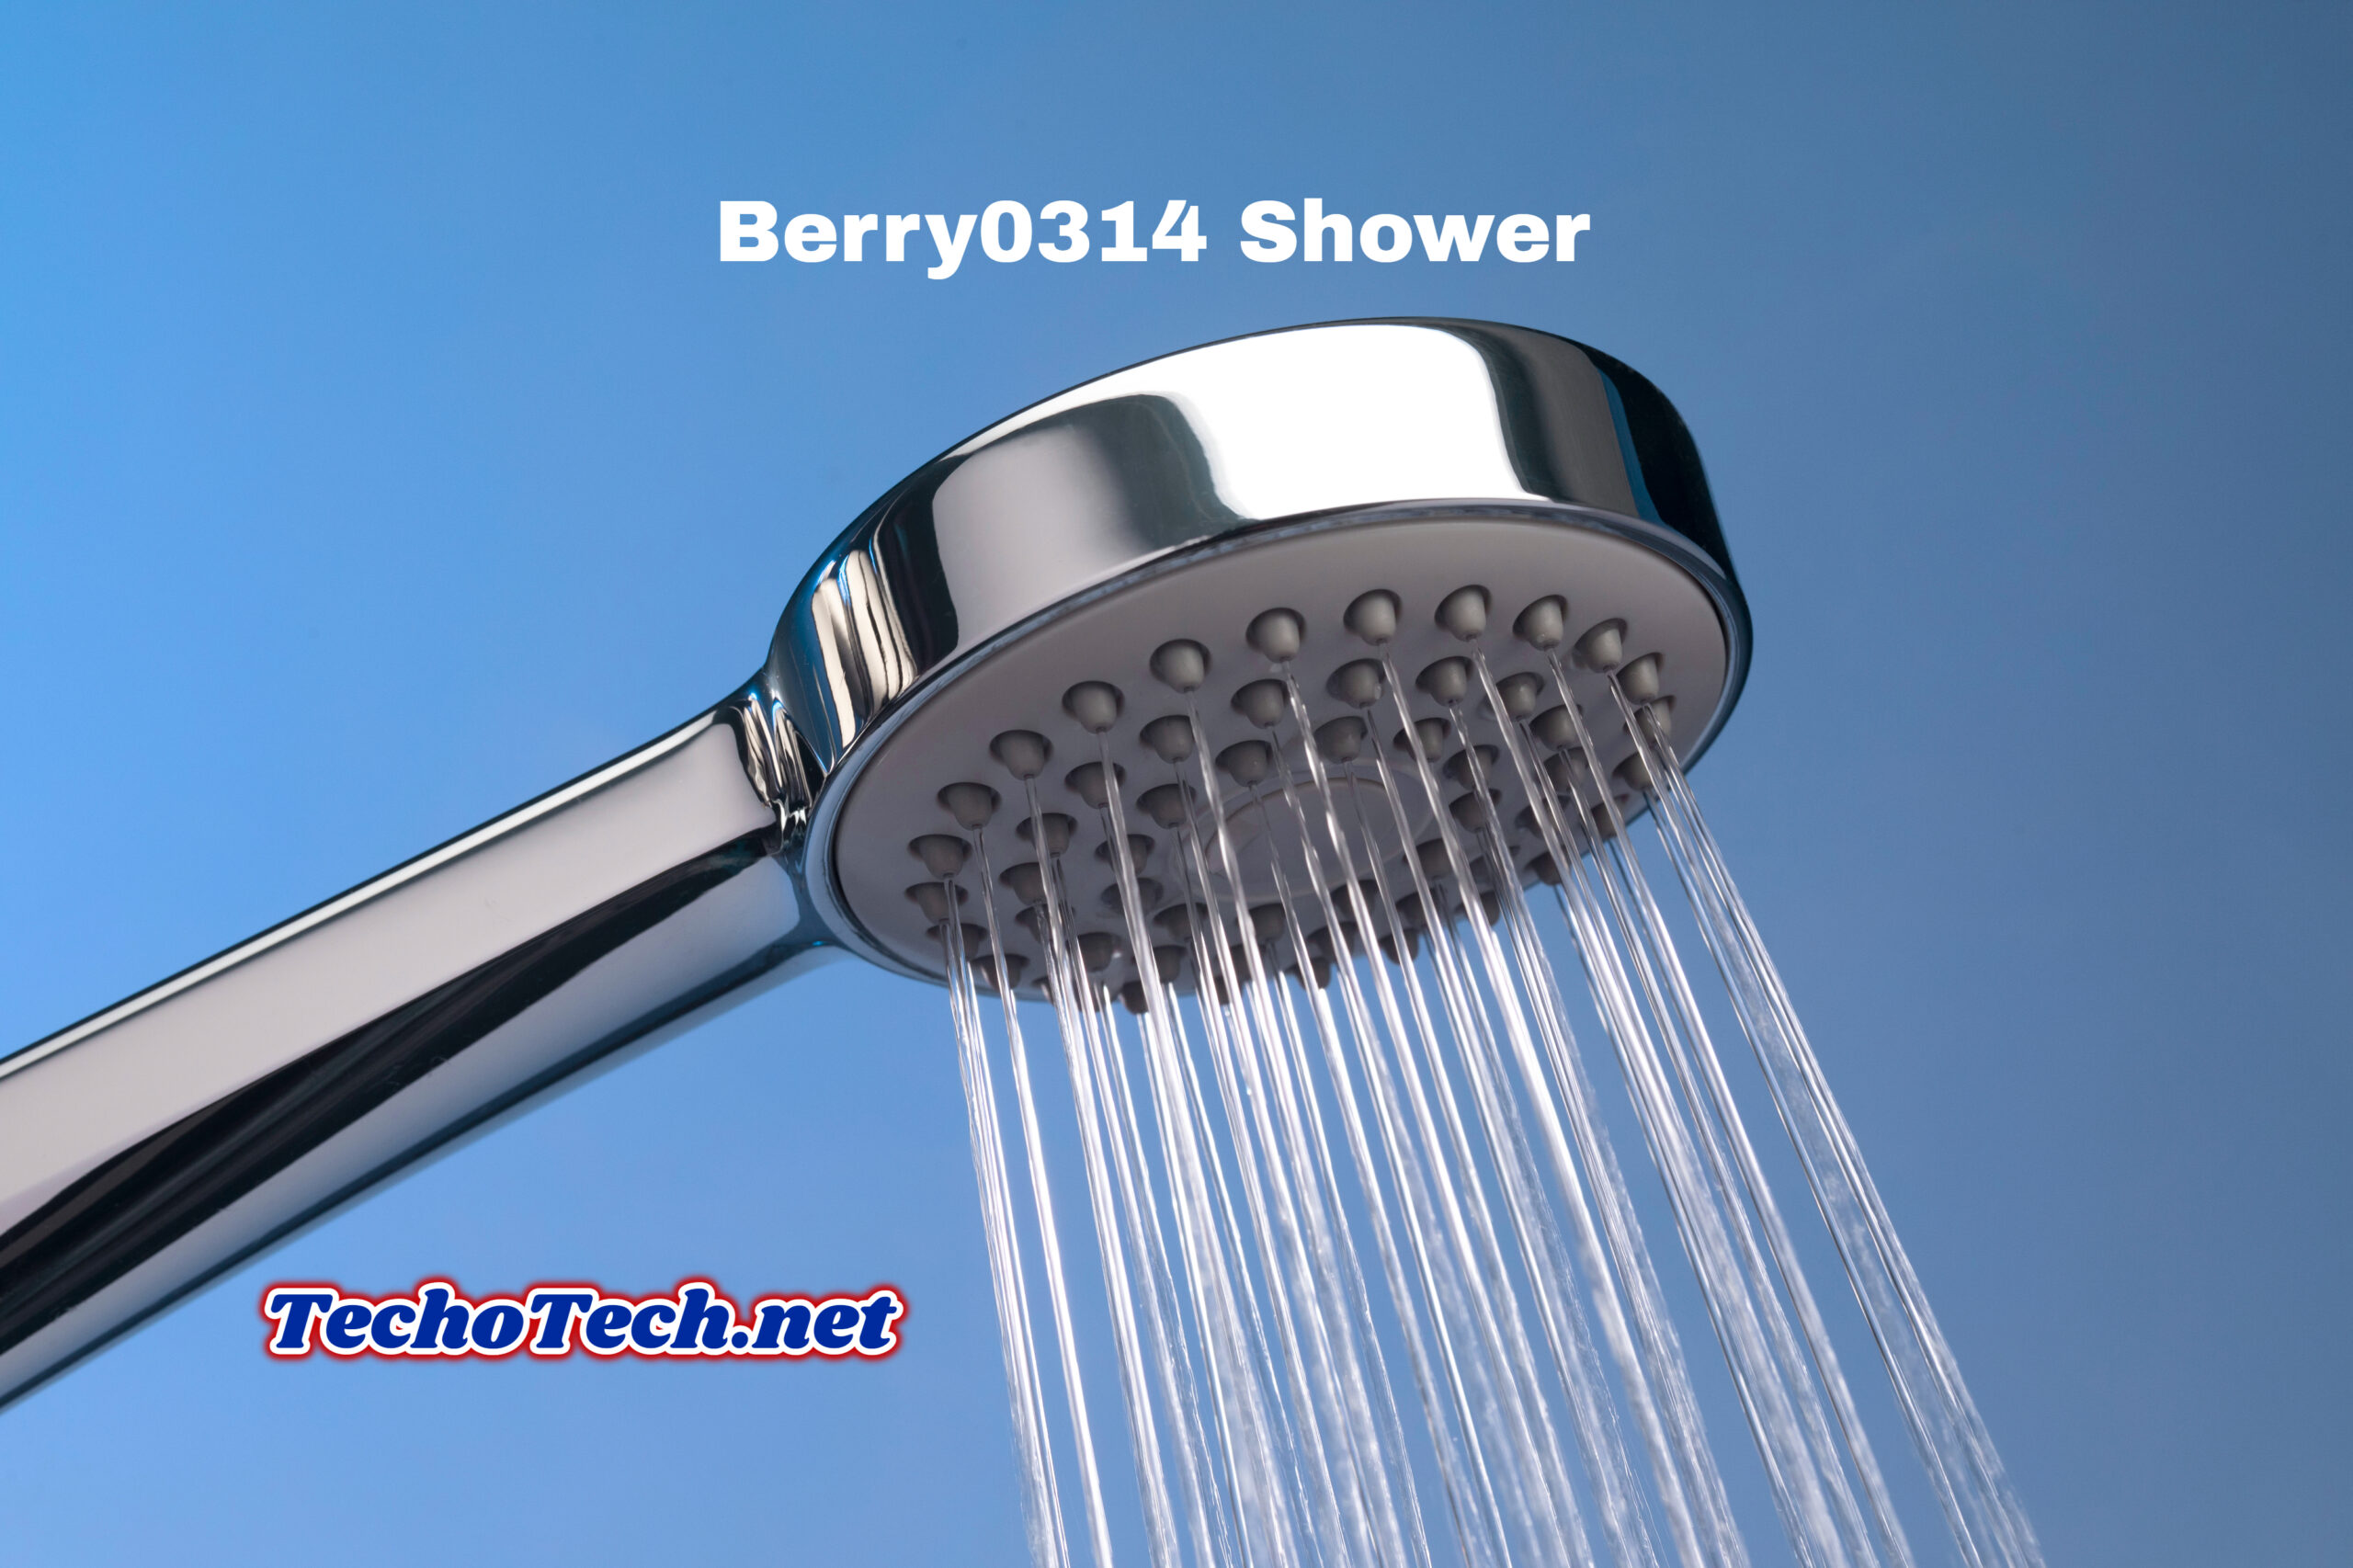 Transform Your Daily Routine with Berry0314 Shower